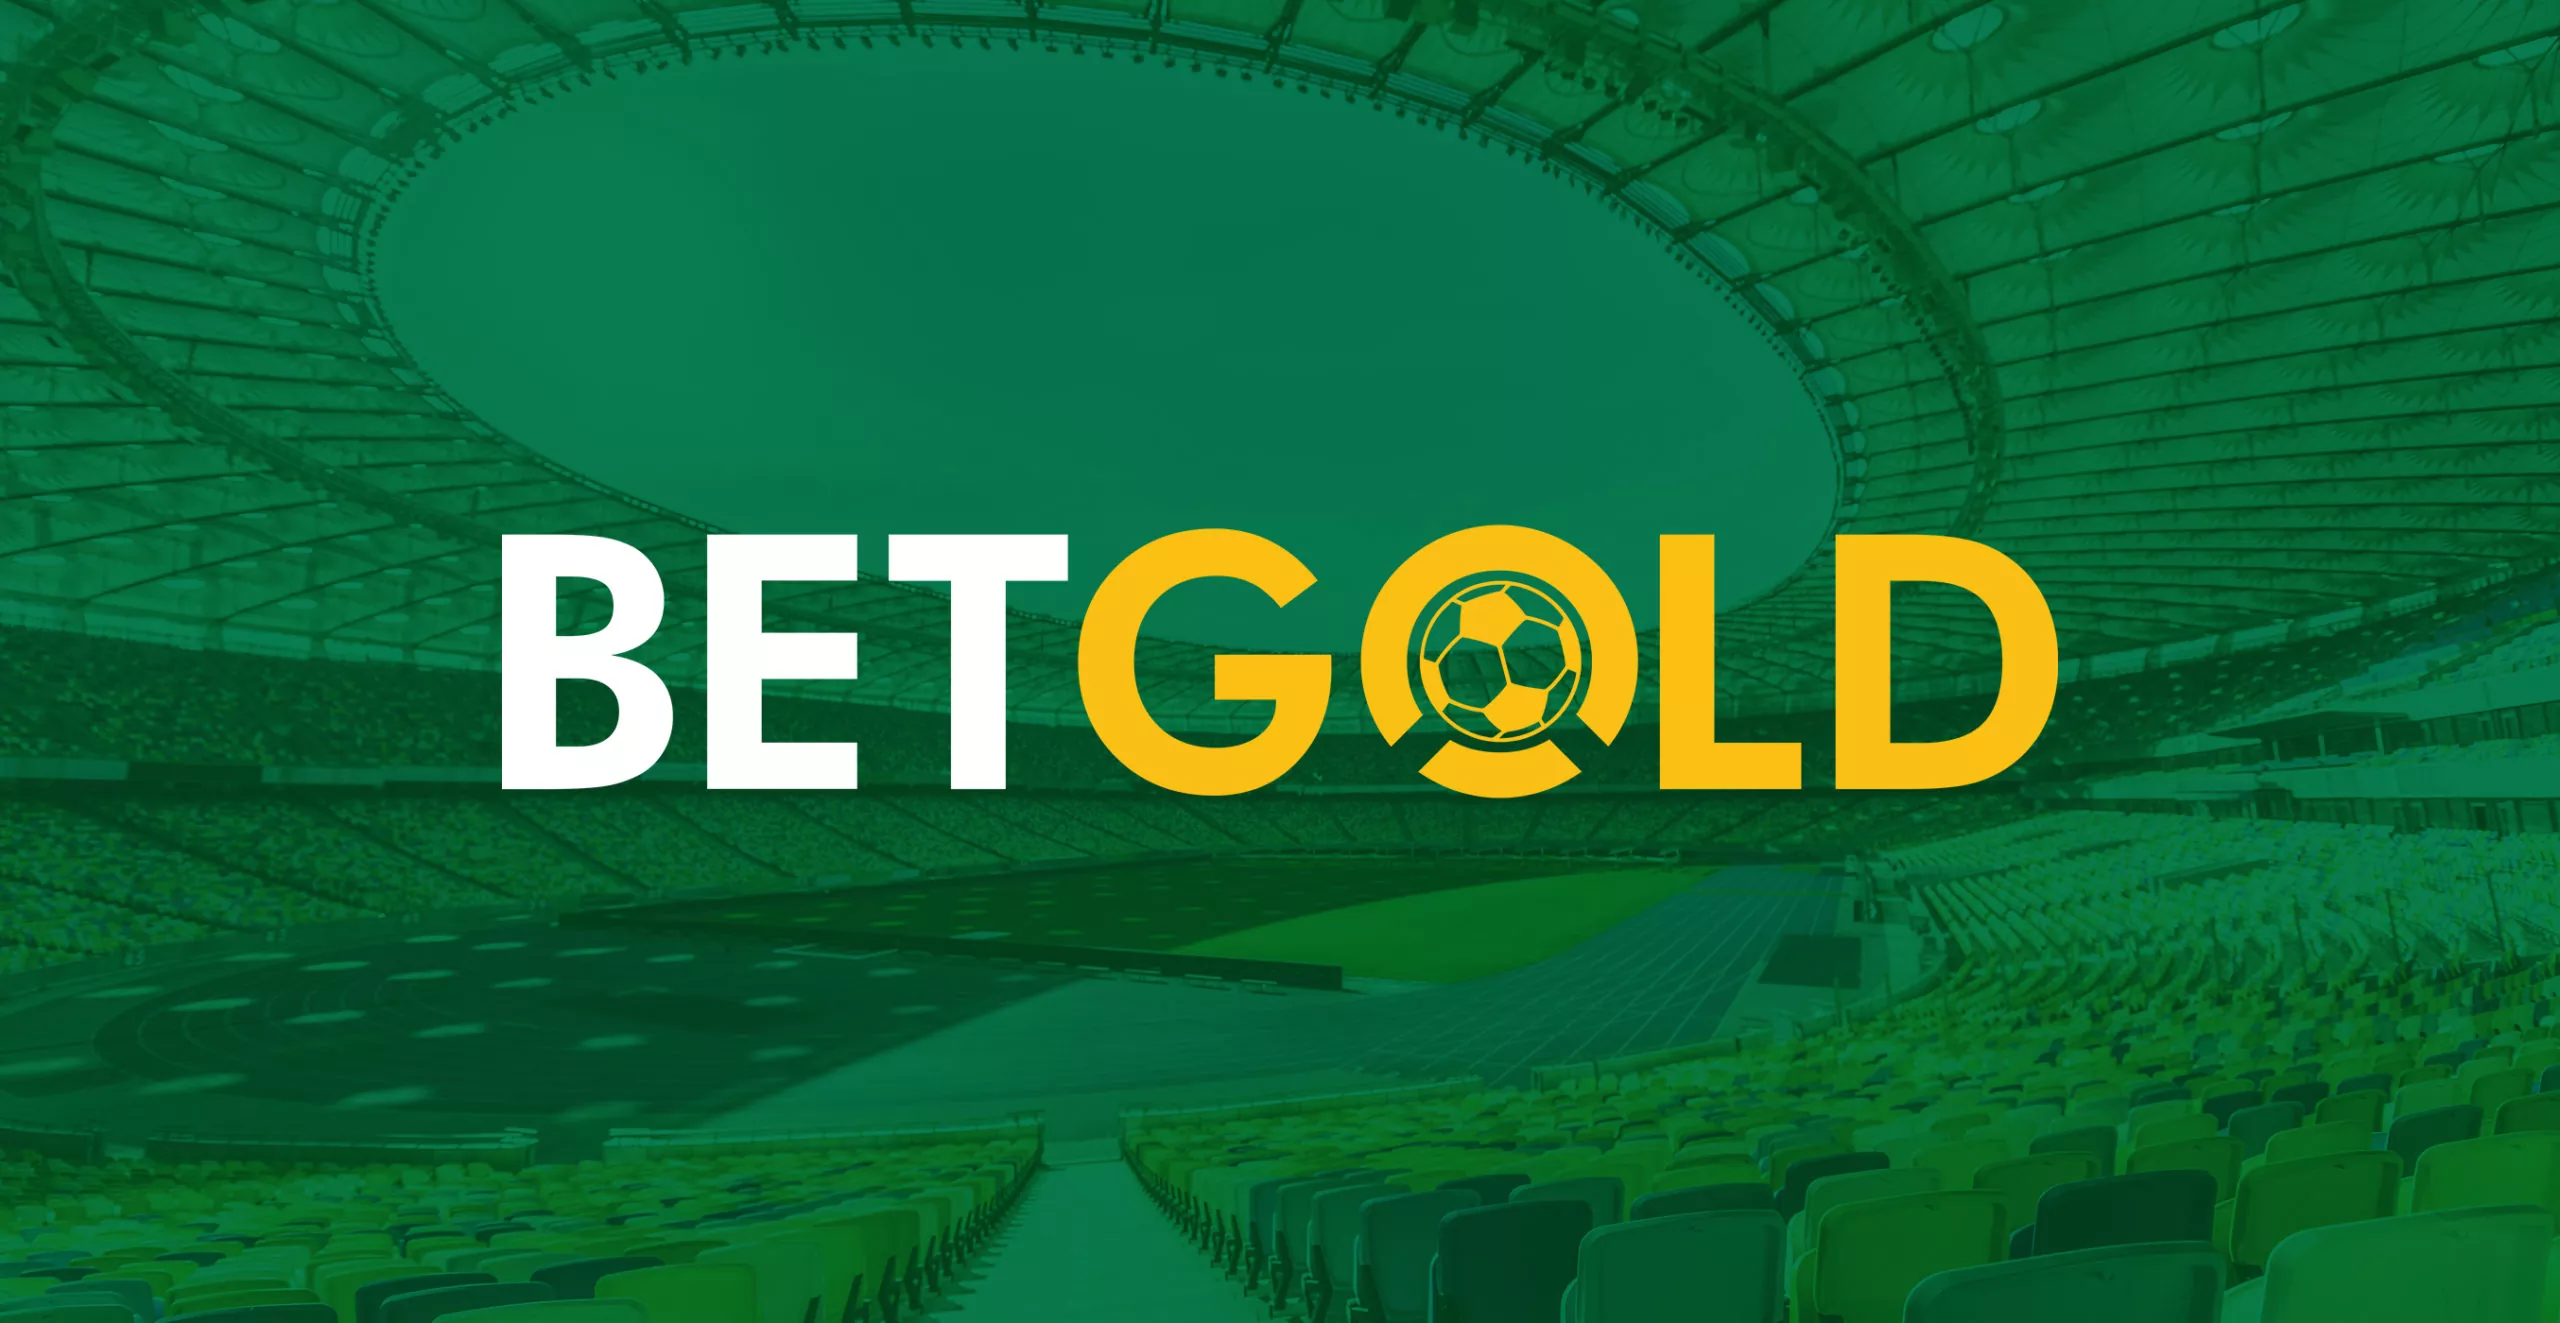 There are a lot of advantages to using Betgold for betting.